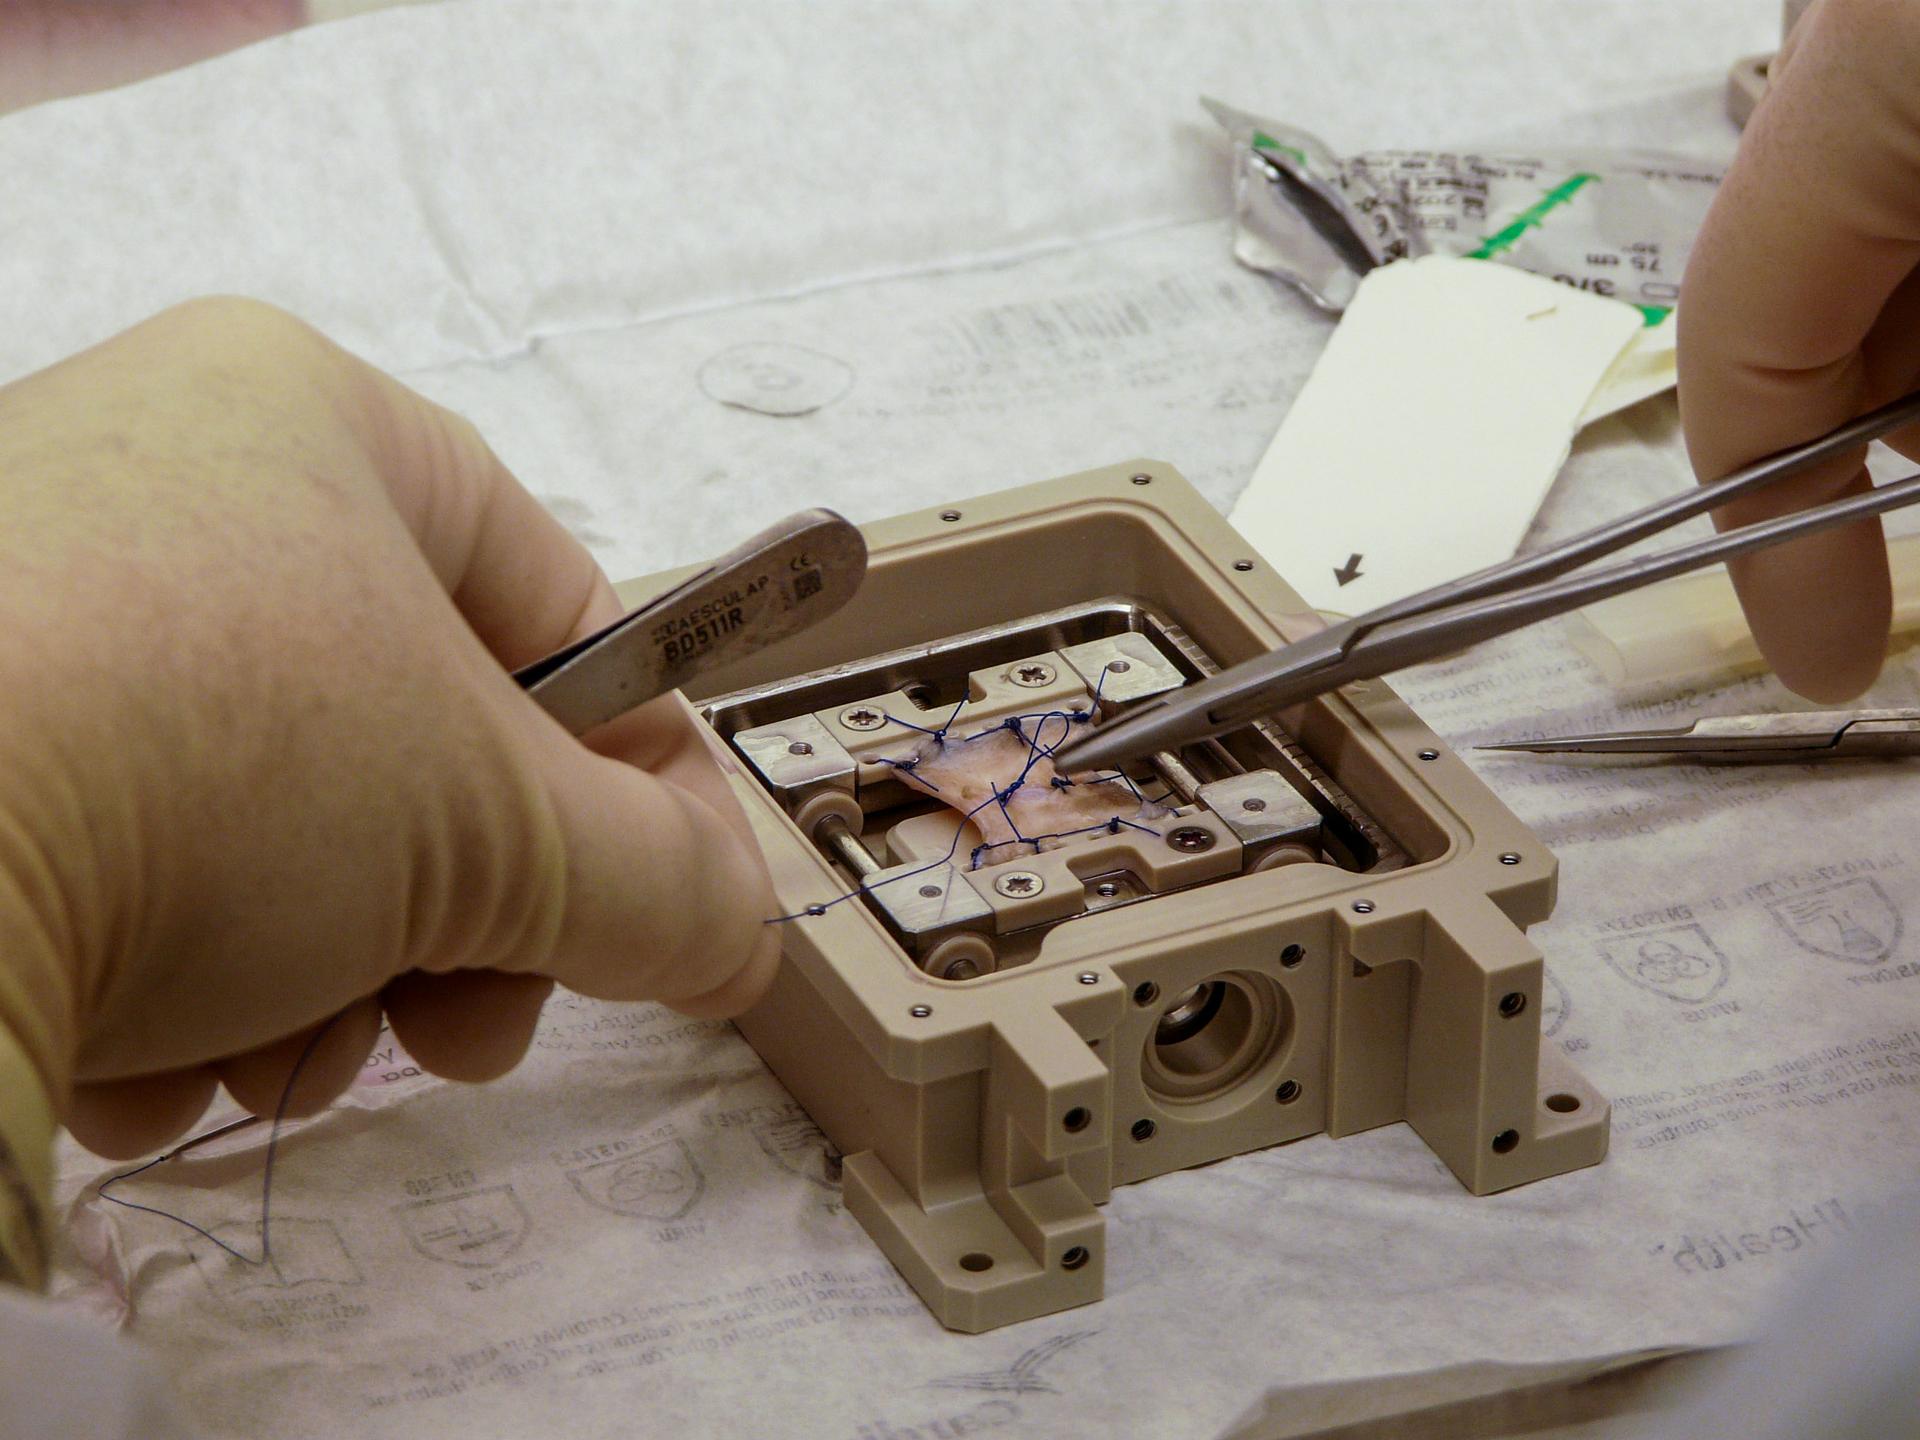 This preflight image shows a sutured skin sample mounted on a frame for the ESA Suture in Space investigation